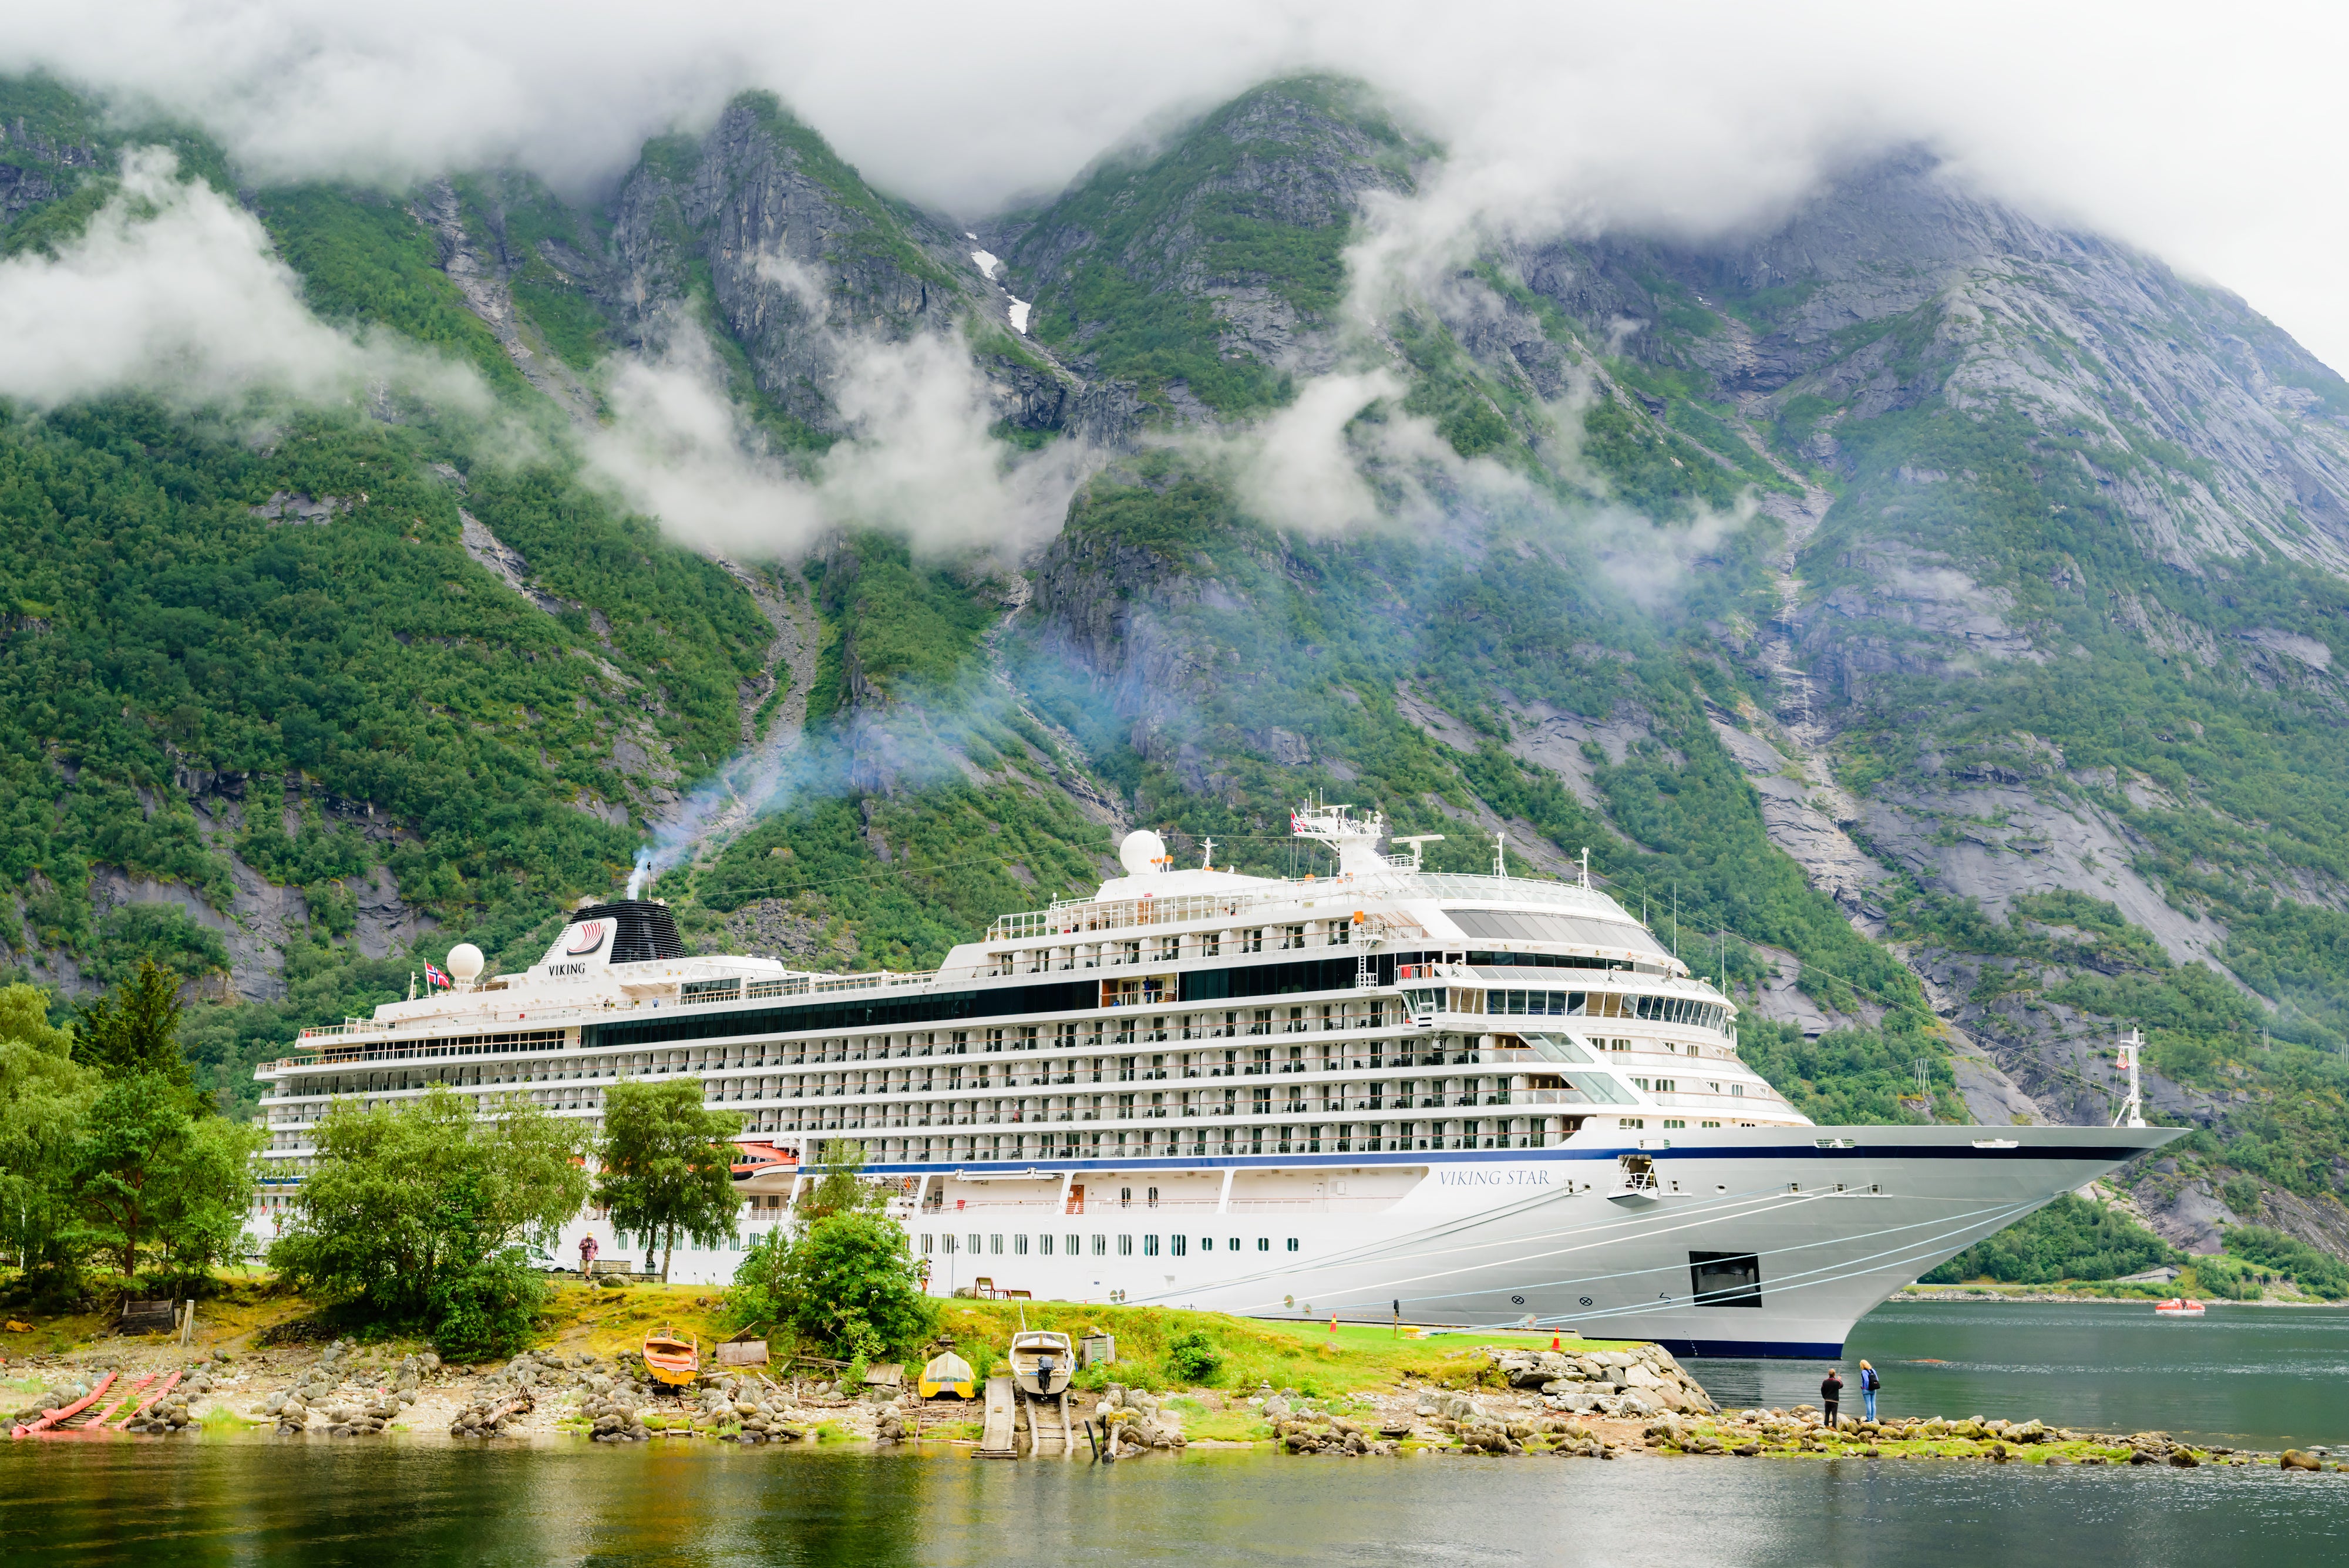 Cruise to Norway’s far north to glimpse the dance of the Aurora Borealis